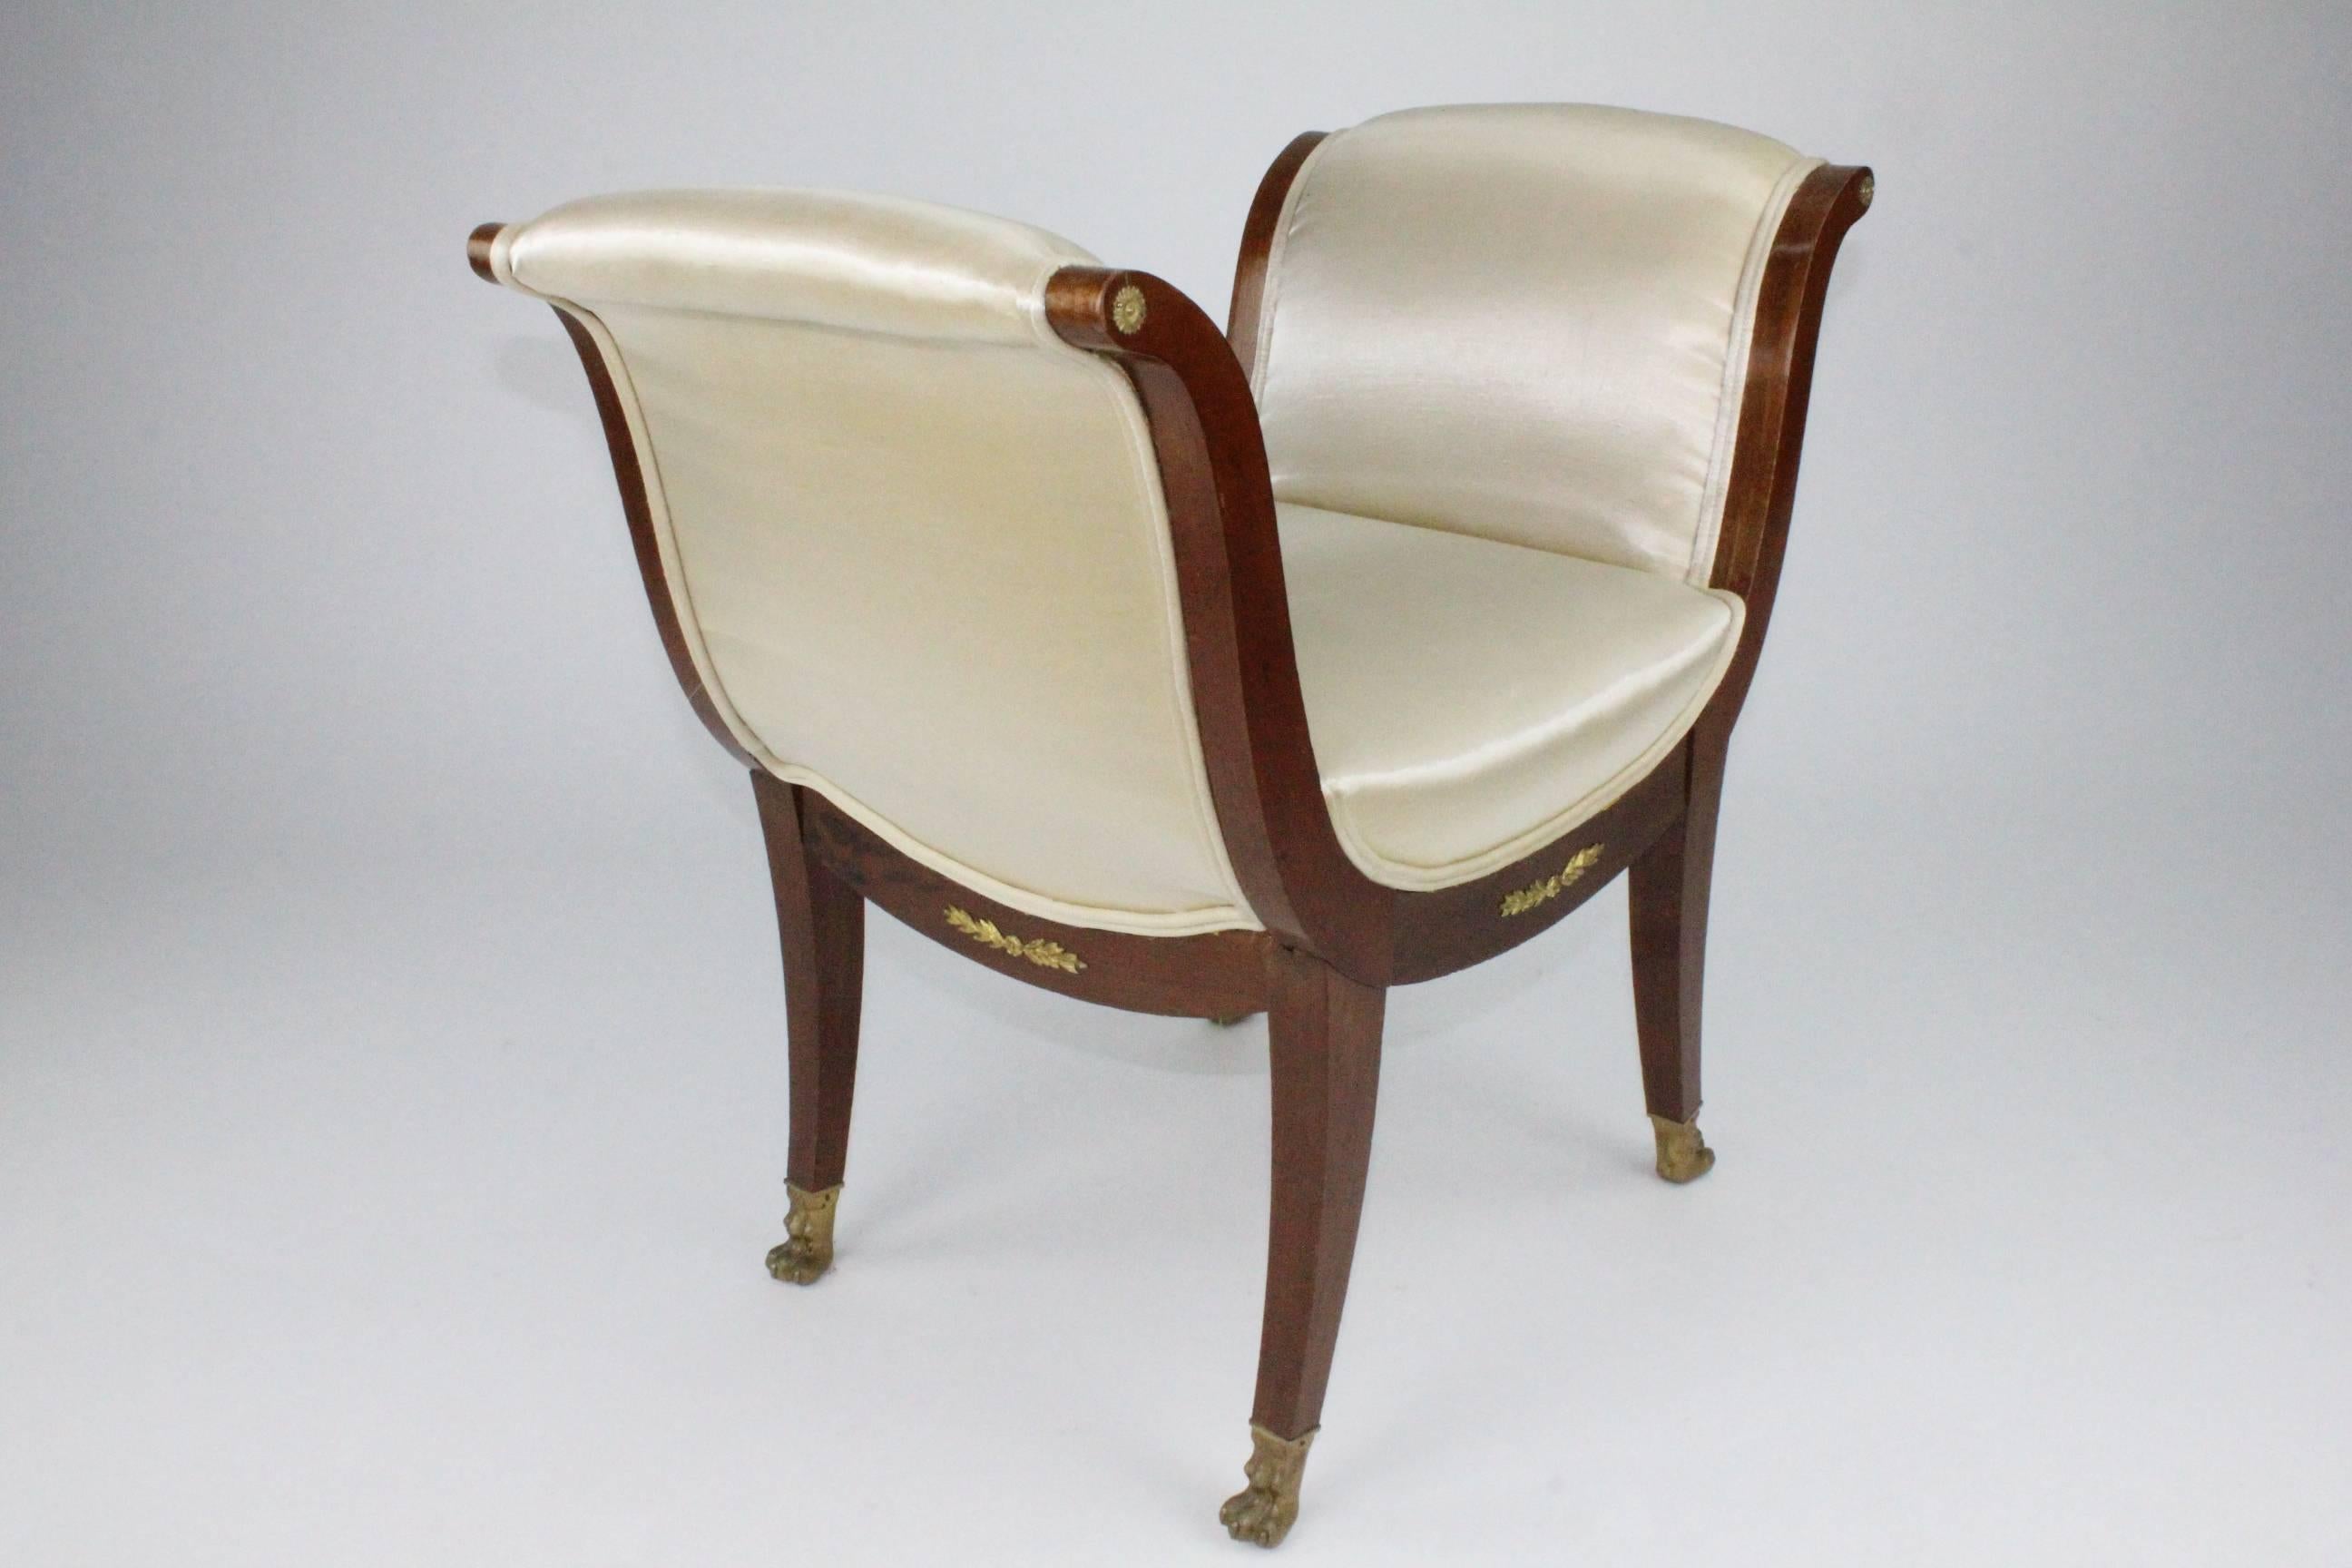 A very stylish and elegant 19th century model. Newly upholstered in cream white/yellow fabric. The mahogany frame is in a good unrestored condition. This stool/banquette is free standing and will make a great impression.